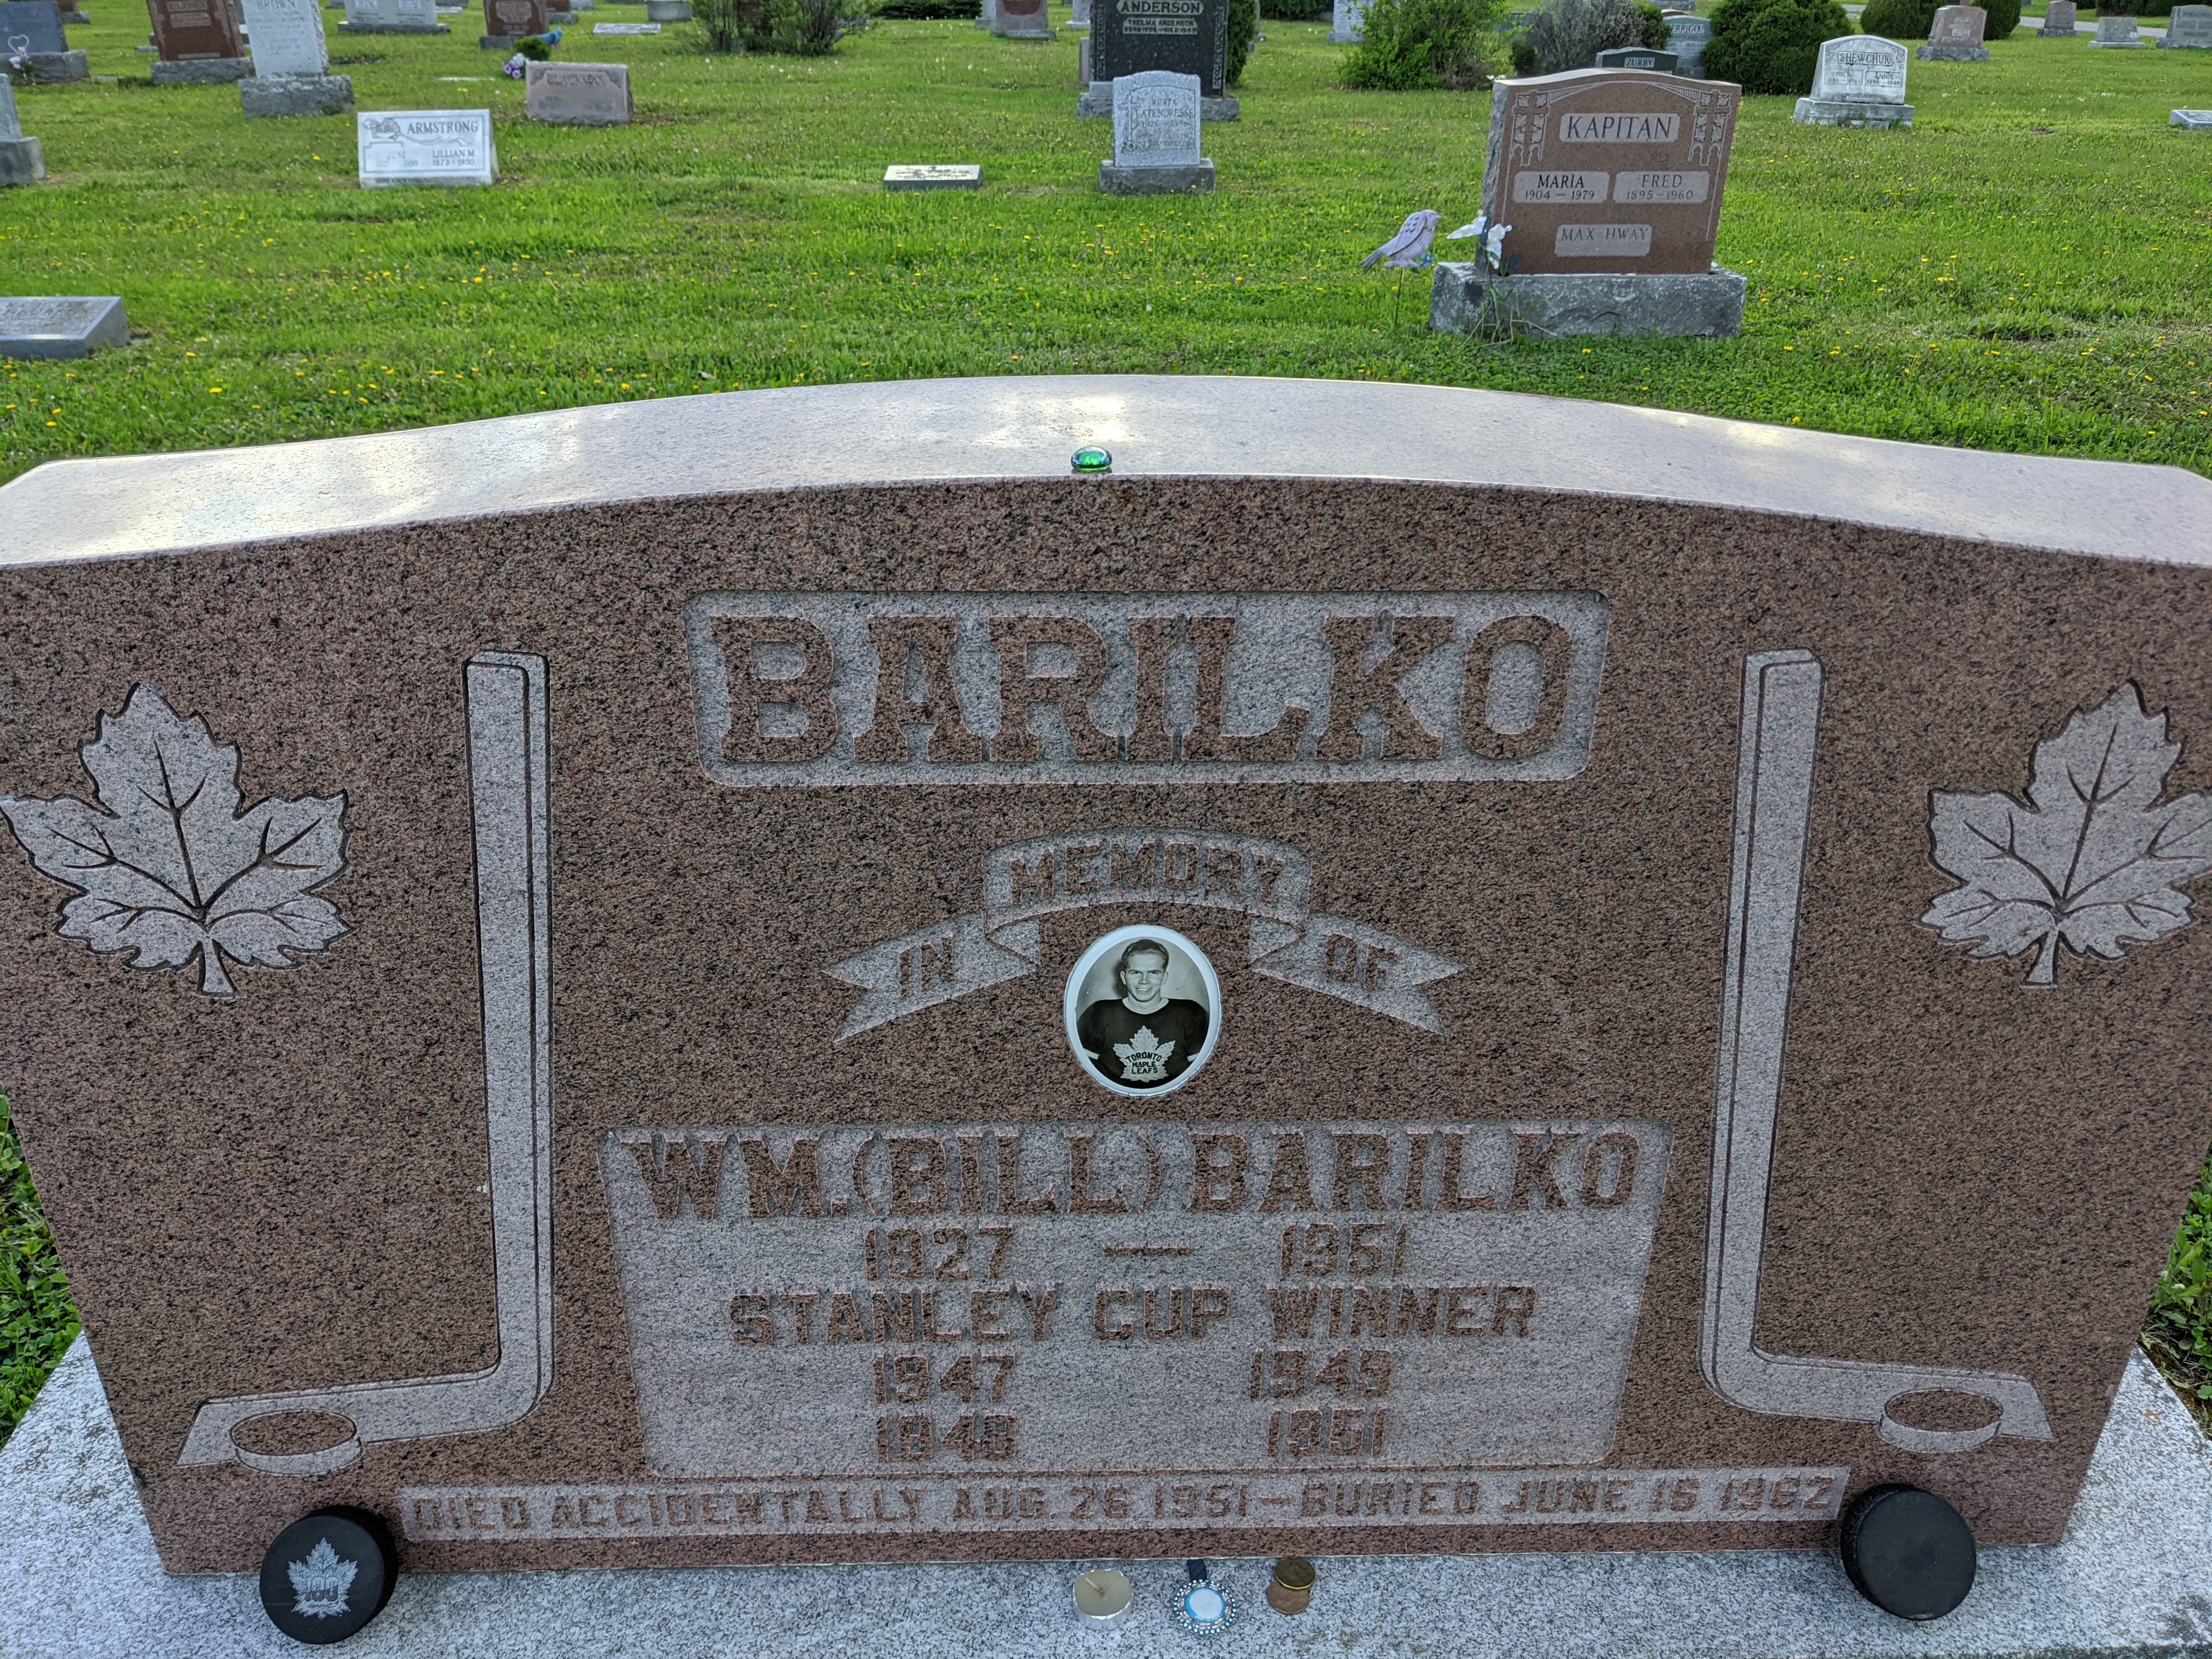 TSN on X: The Mission: Bill Barilko, Timmins, Ontario and